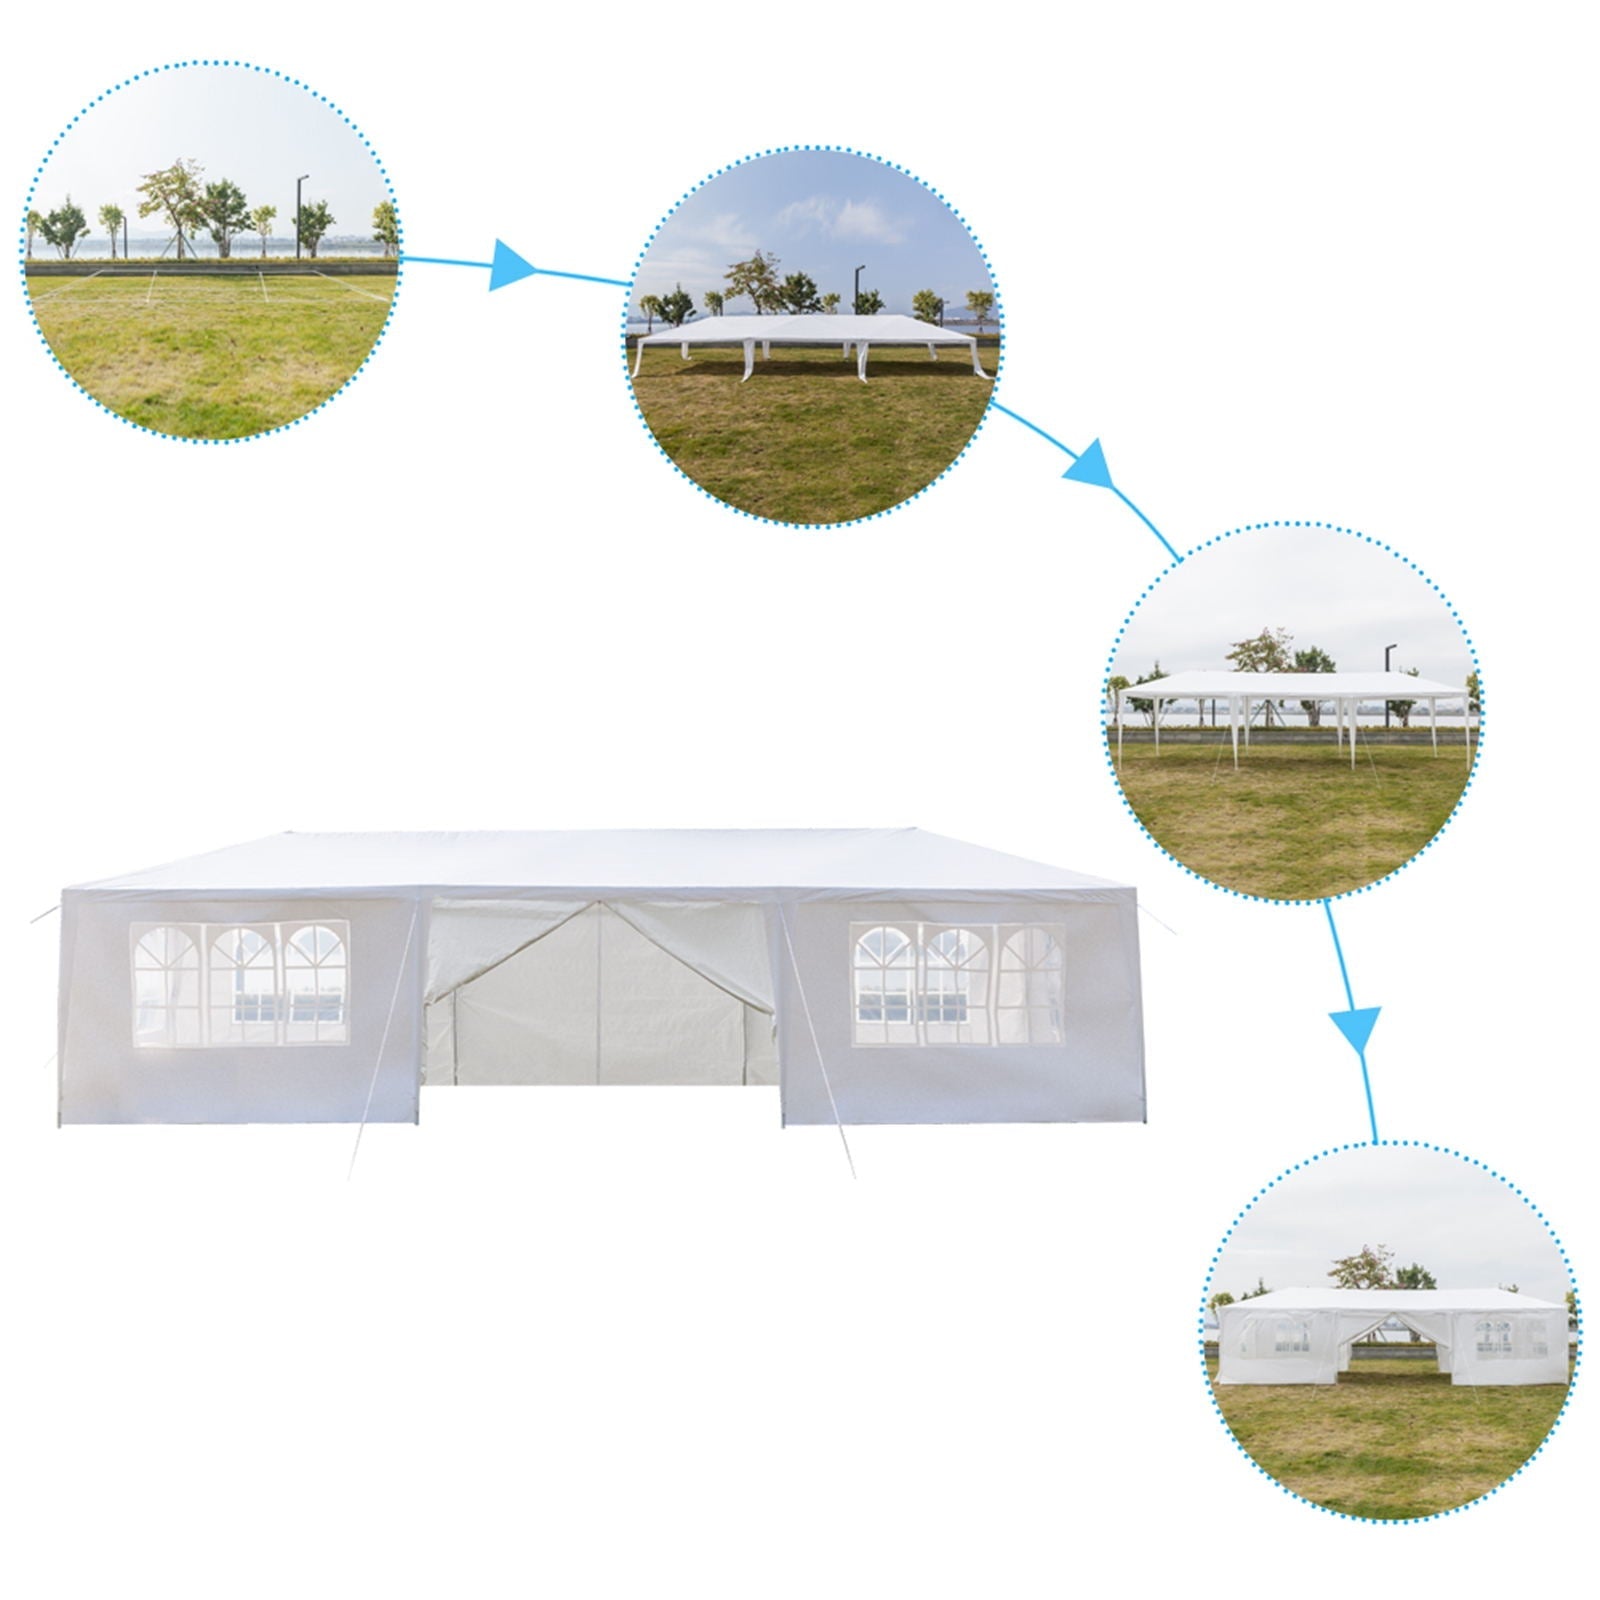 X XBEN 10' x 30'  Heavy Duty Canopy Tent Party Tent Outdoor Event Instant Tent Gazebo, Sturdy Steel Frame Shelter w/8 Removable Sidewalls and Carry Bag, White